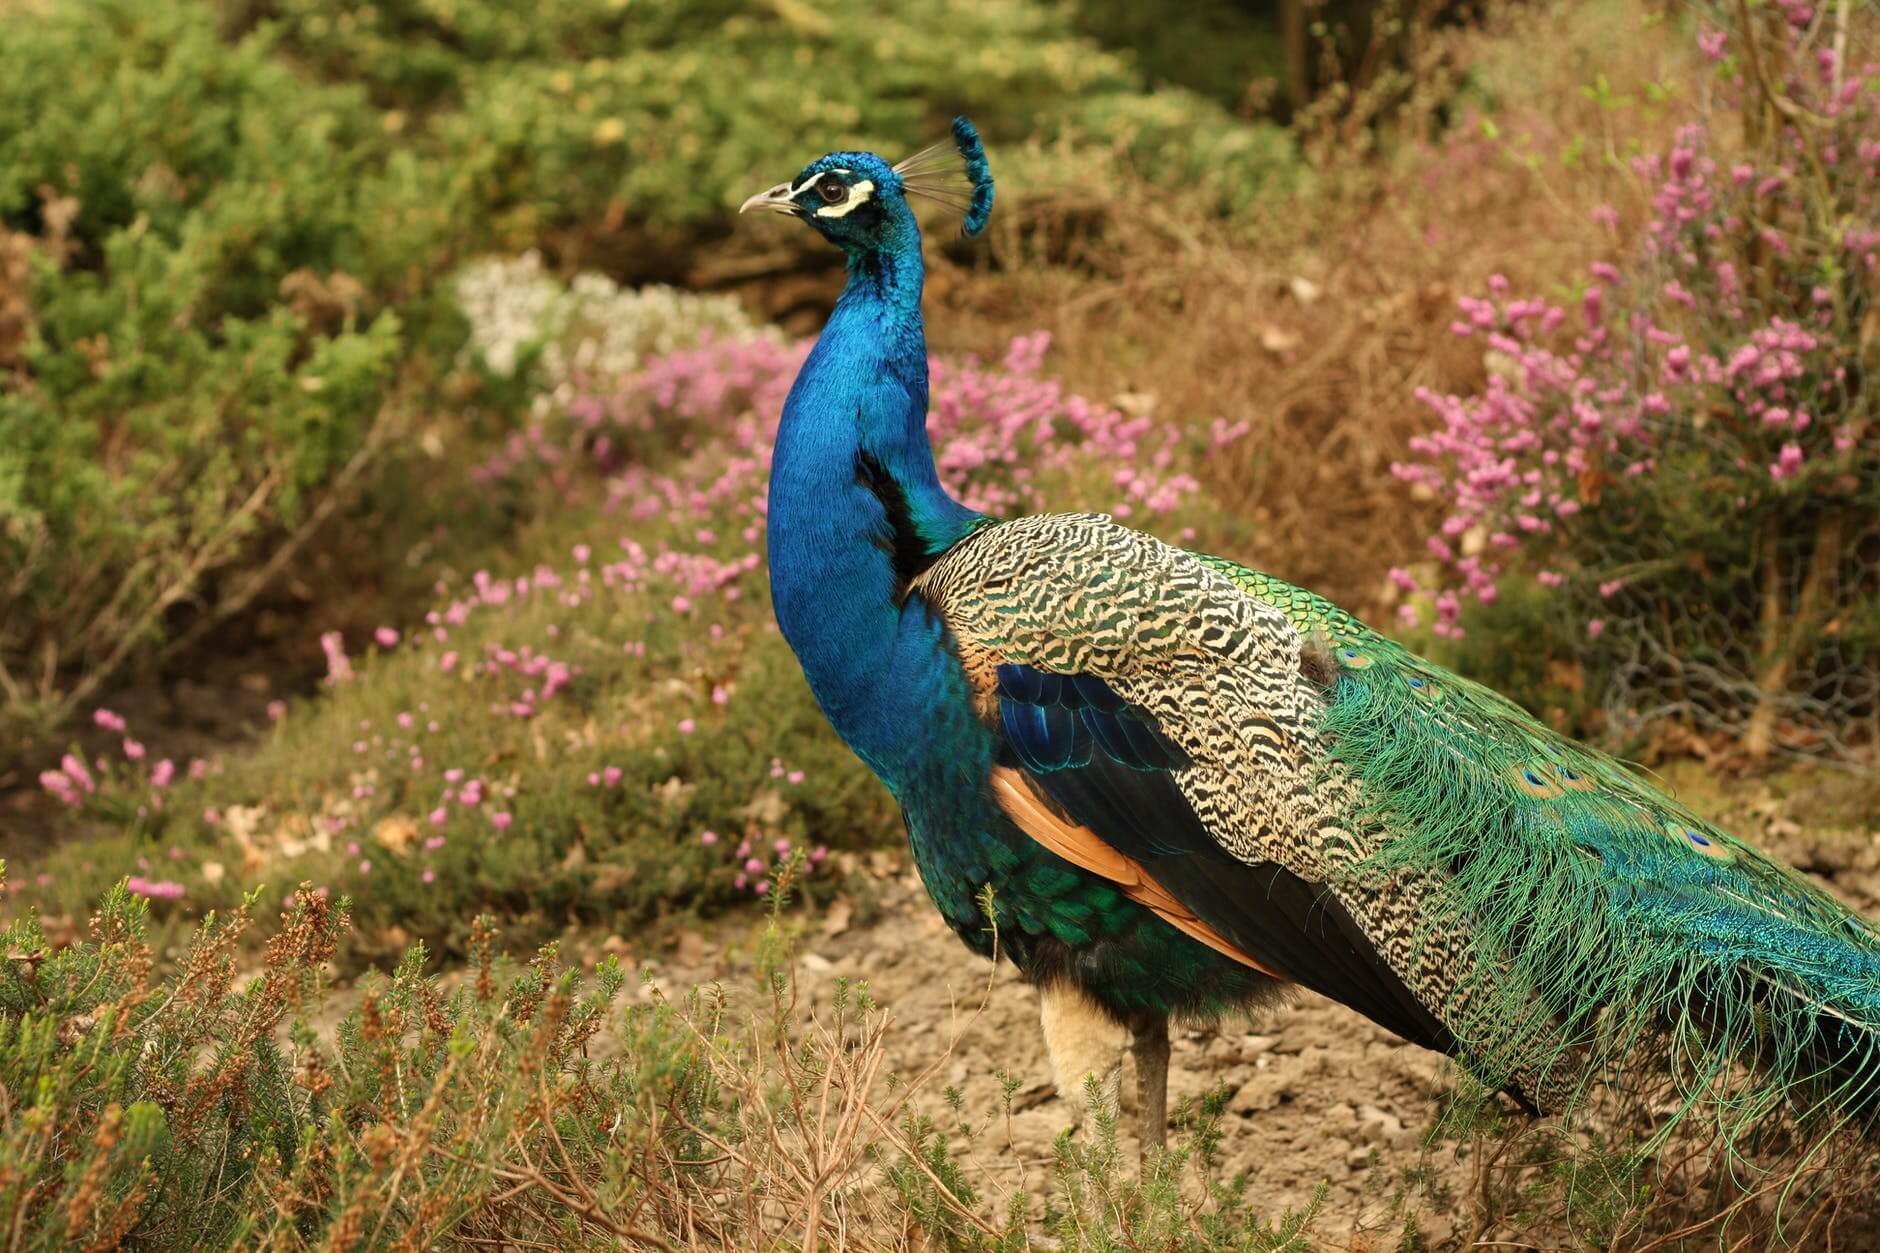 blue green and orange peacock standing in the ground during daytime